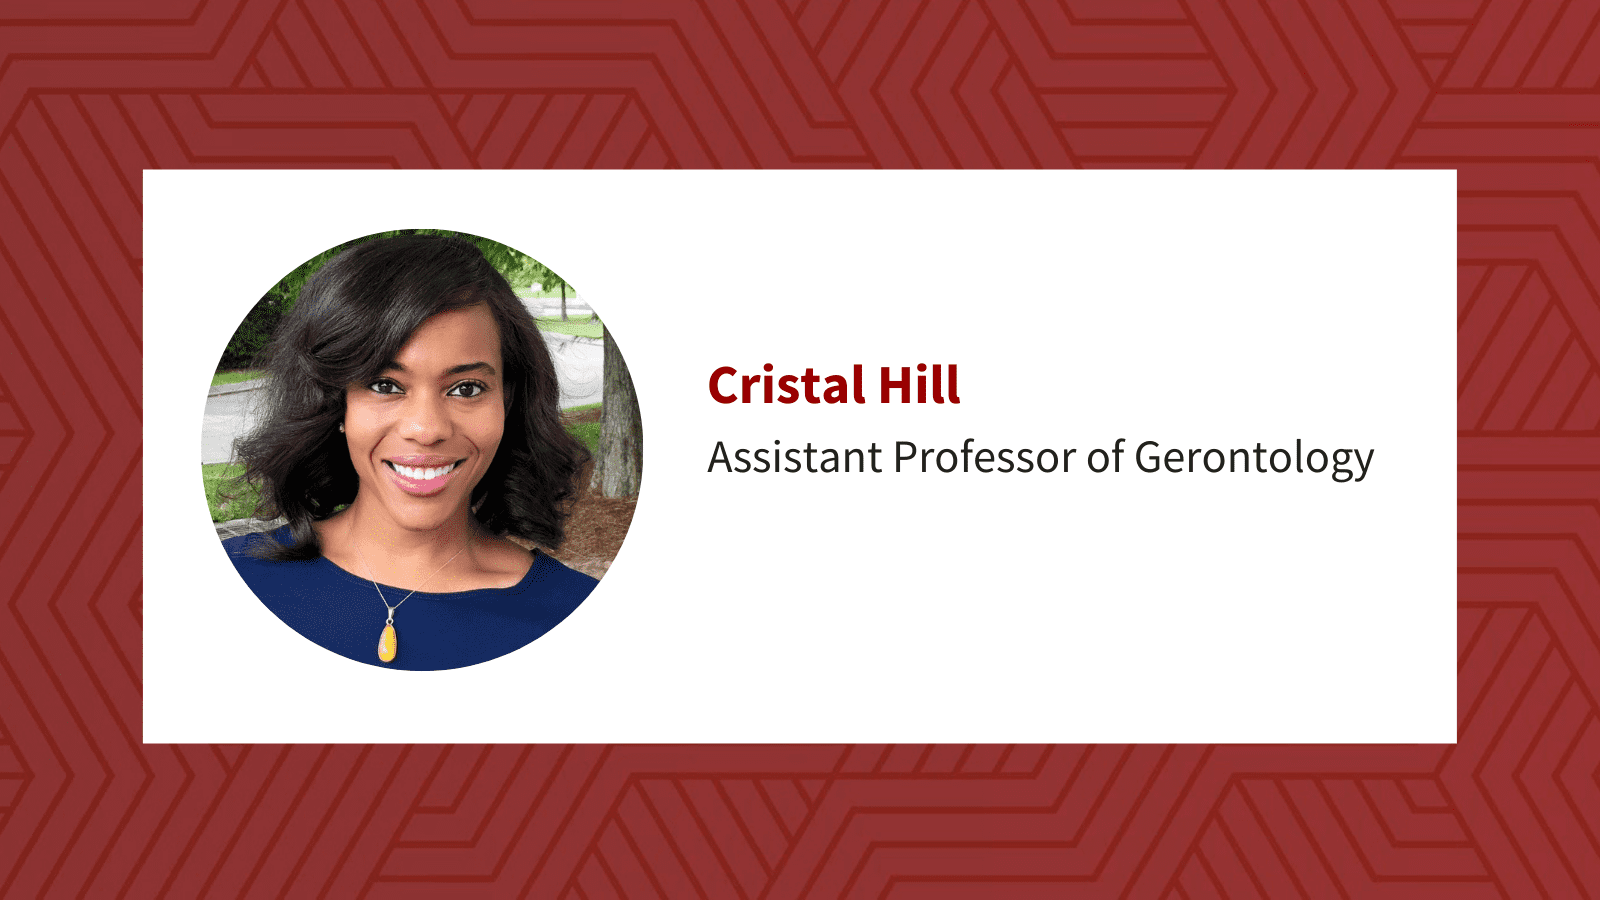 Cristal Hill portrait with name and faculty title